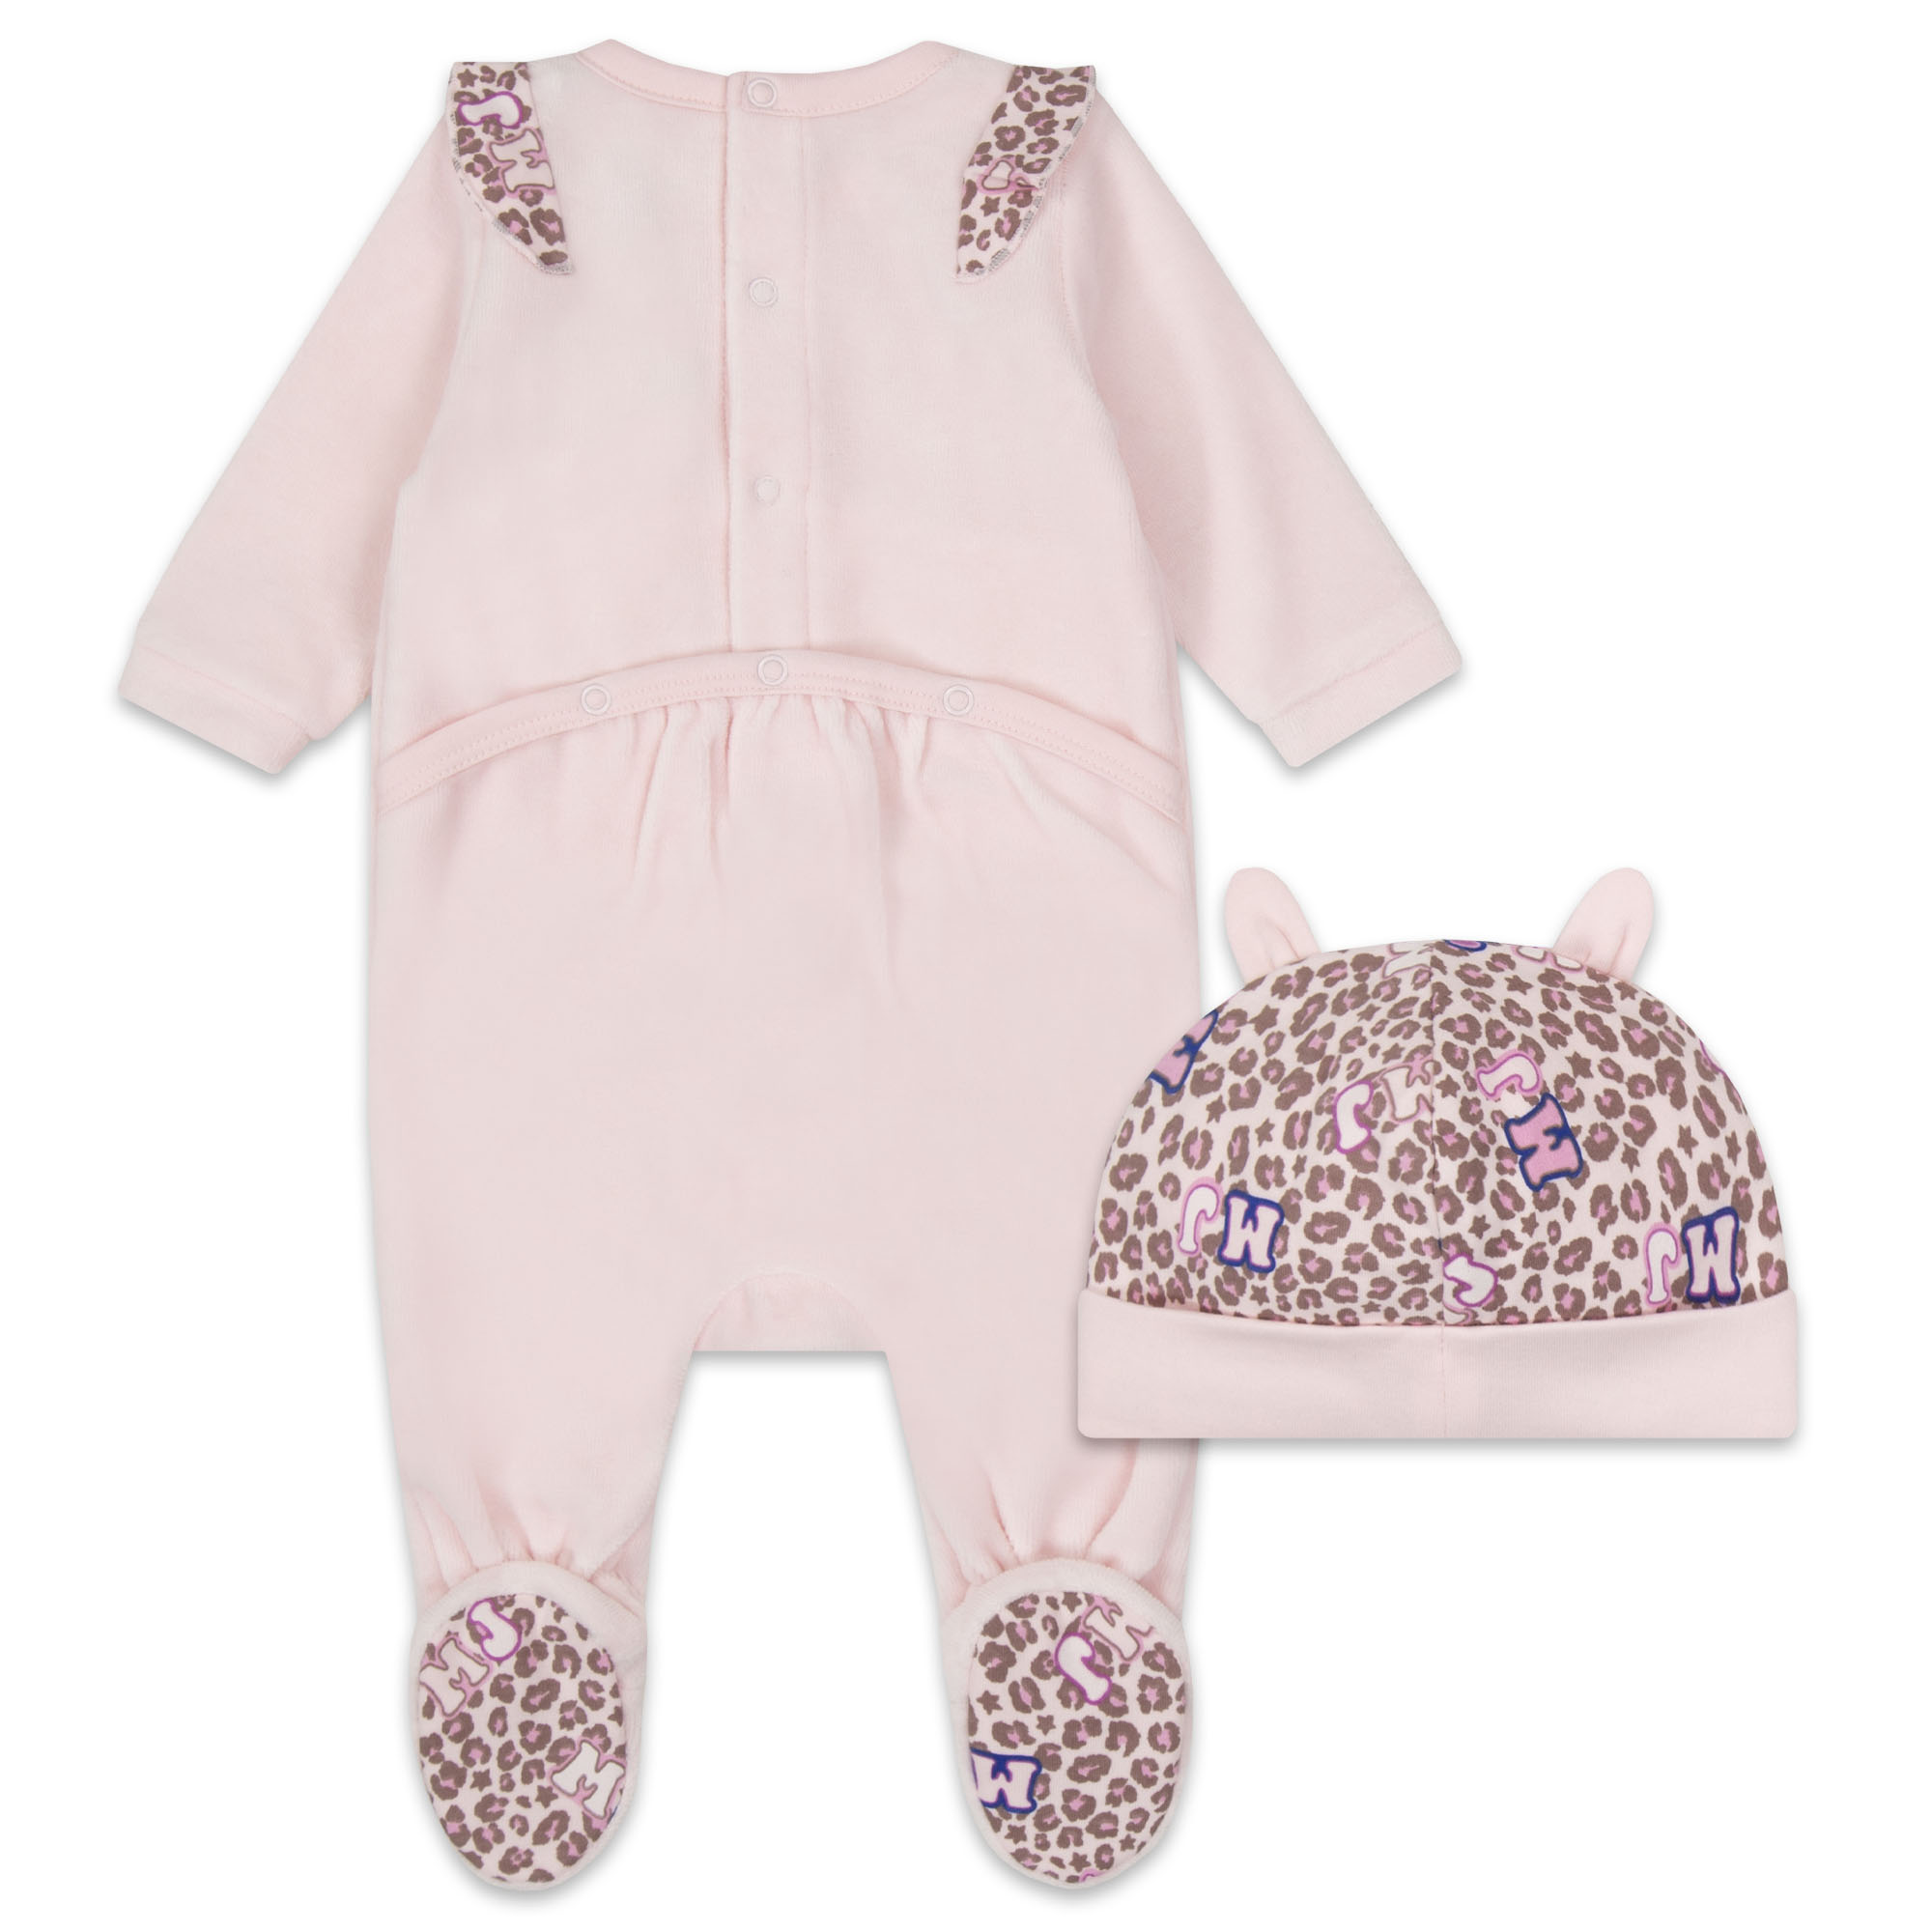 Pyjama-and-hat matching set MARC JACOBS for UNISEX